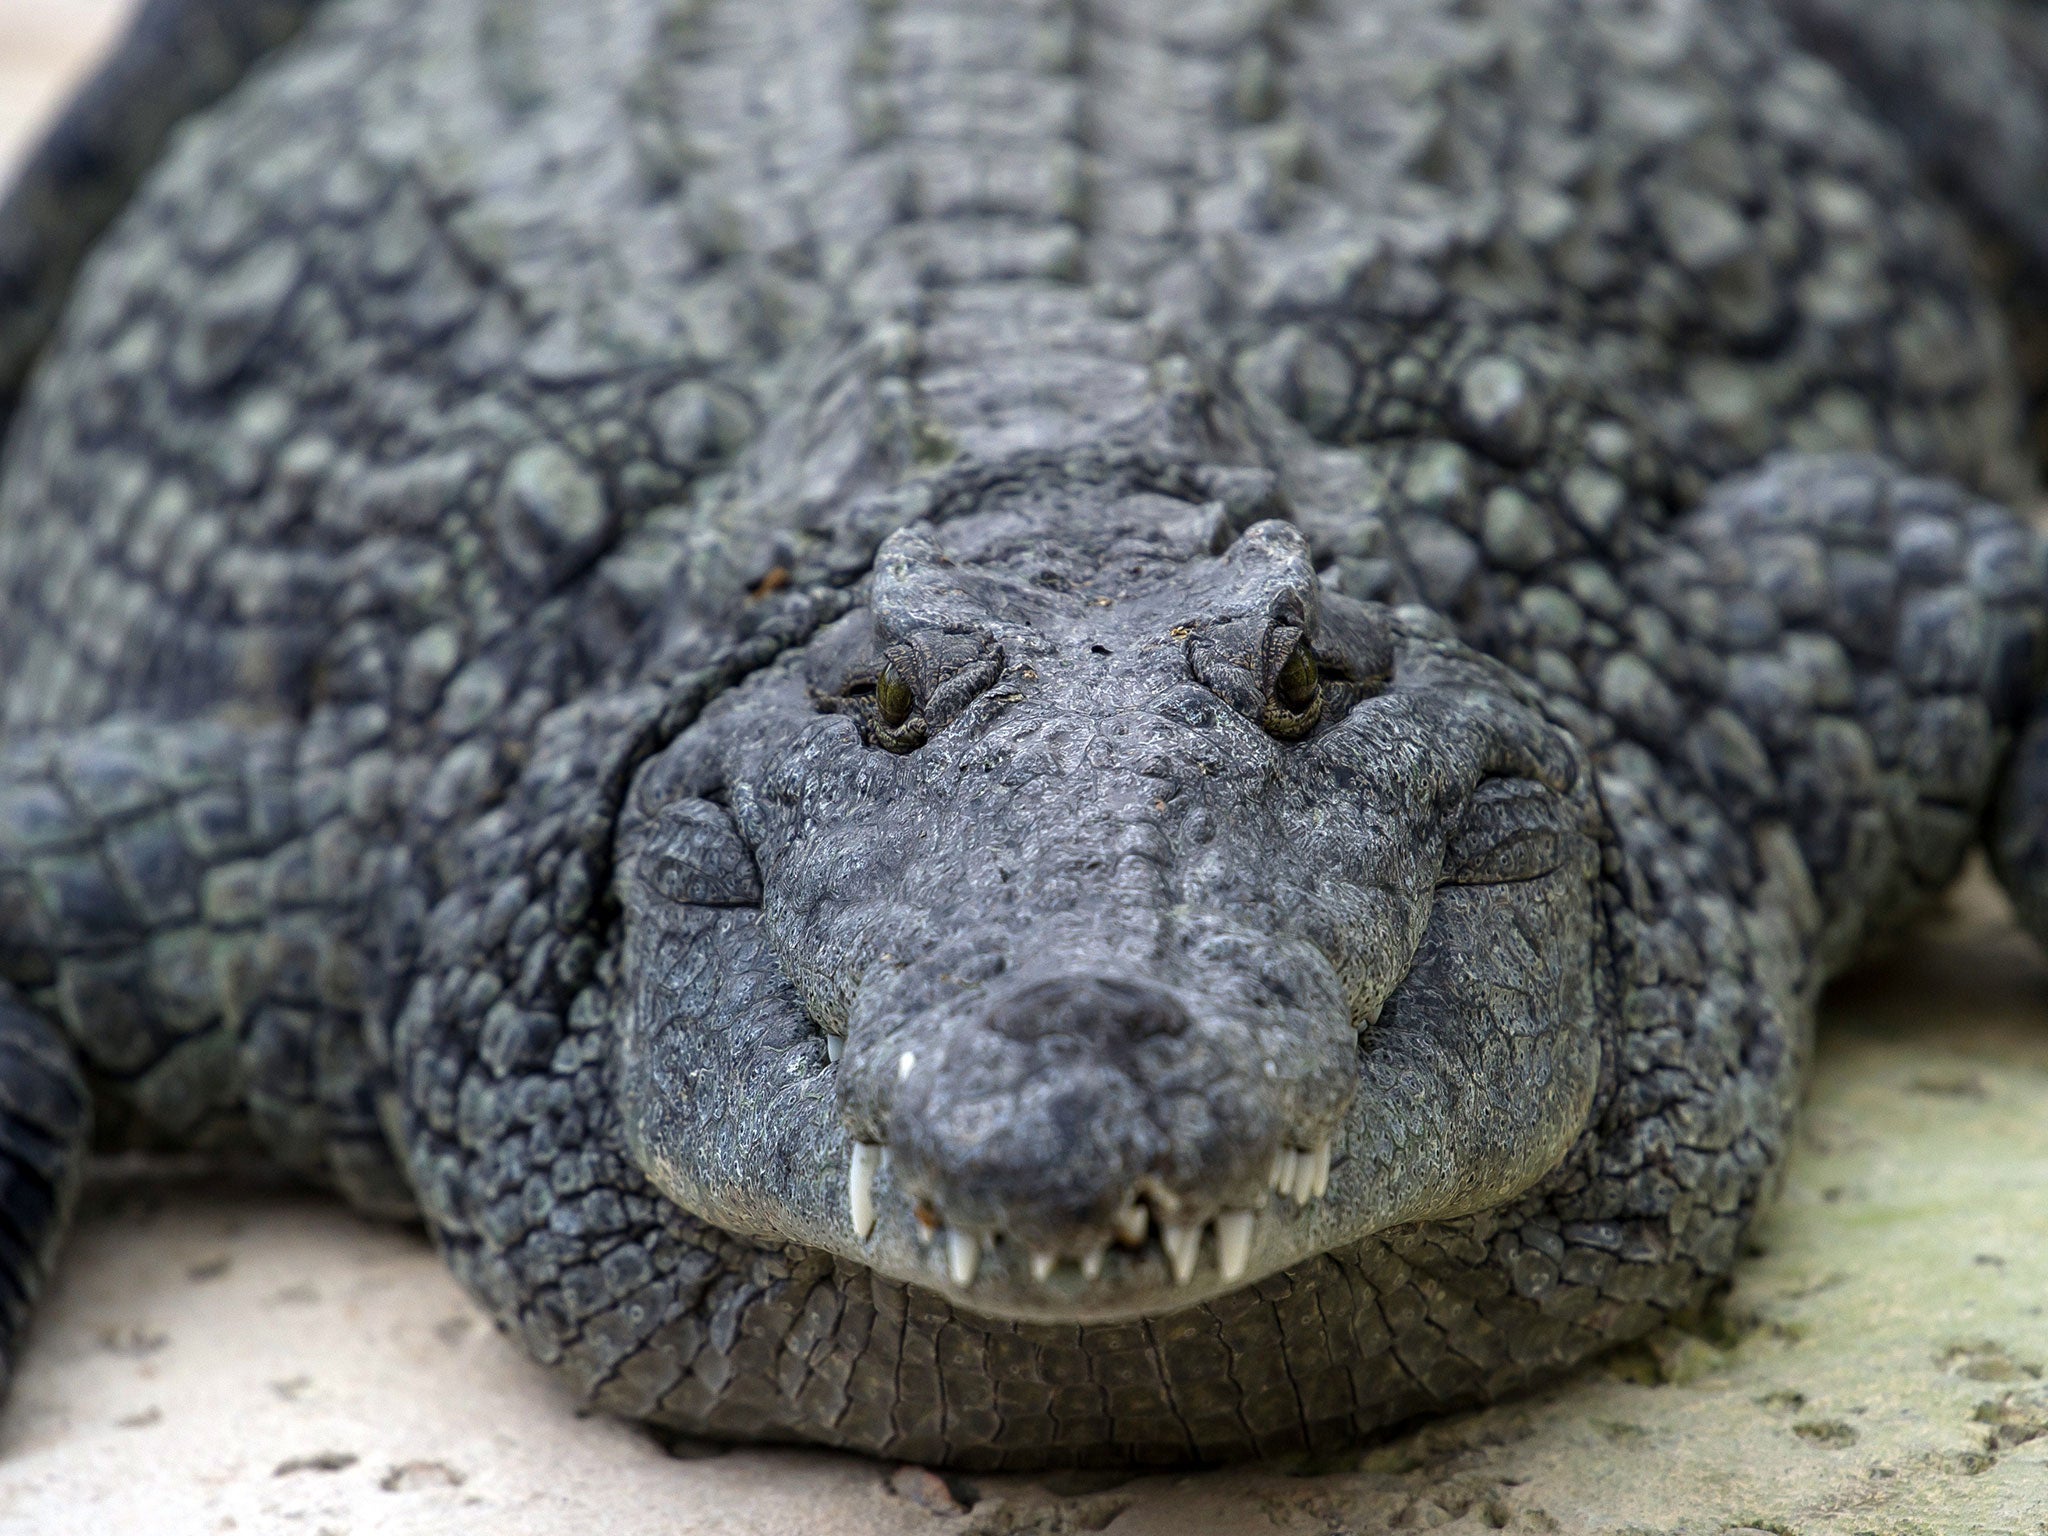 The crocodiles were monitored with infrared cameras